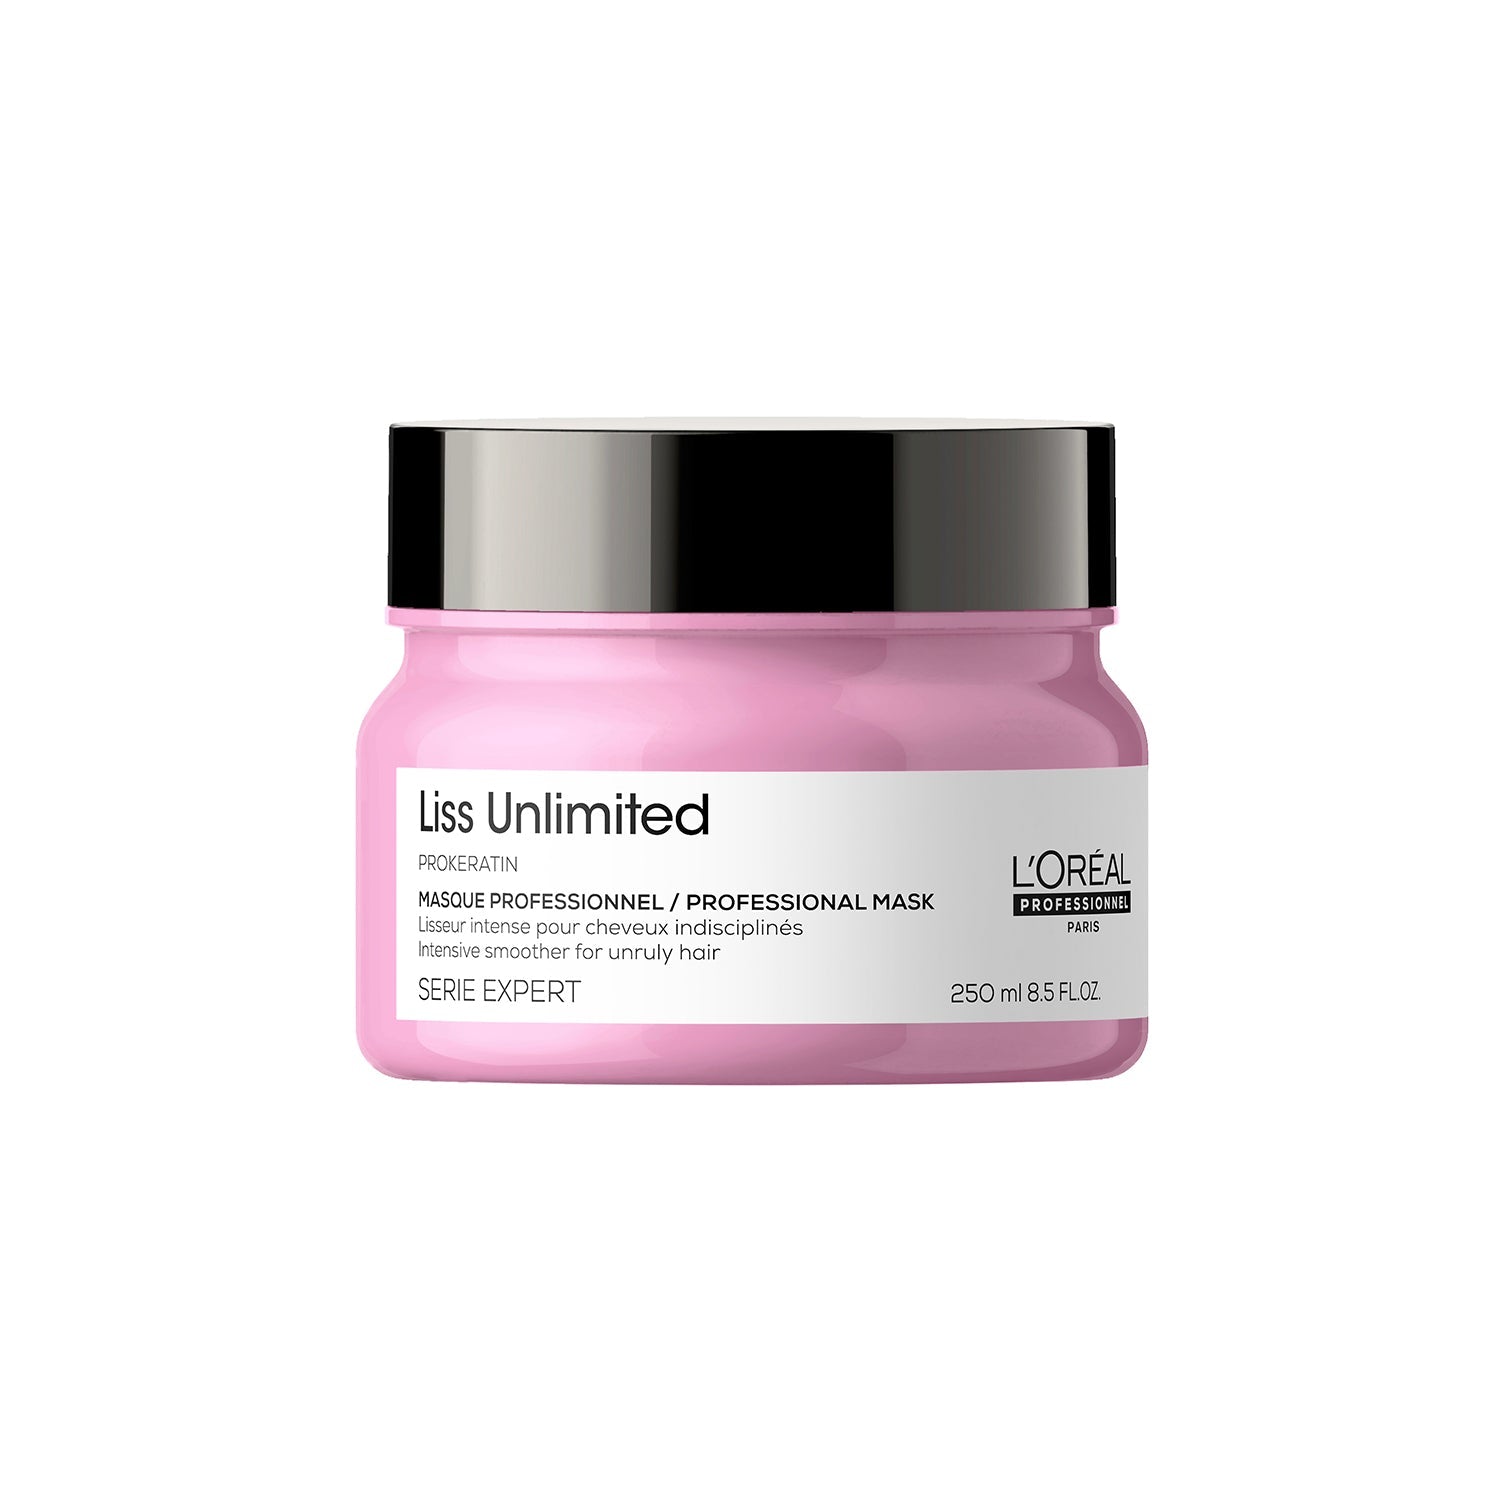 Liss Unlimited Anti-Frizz Disciplinary Mask